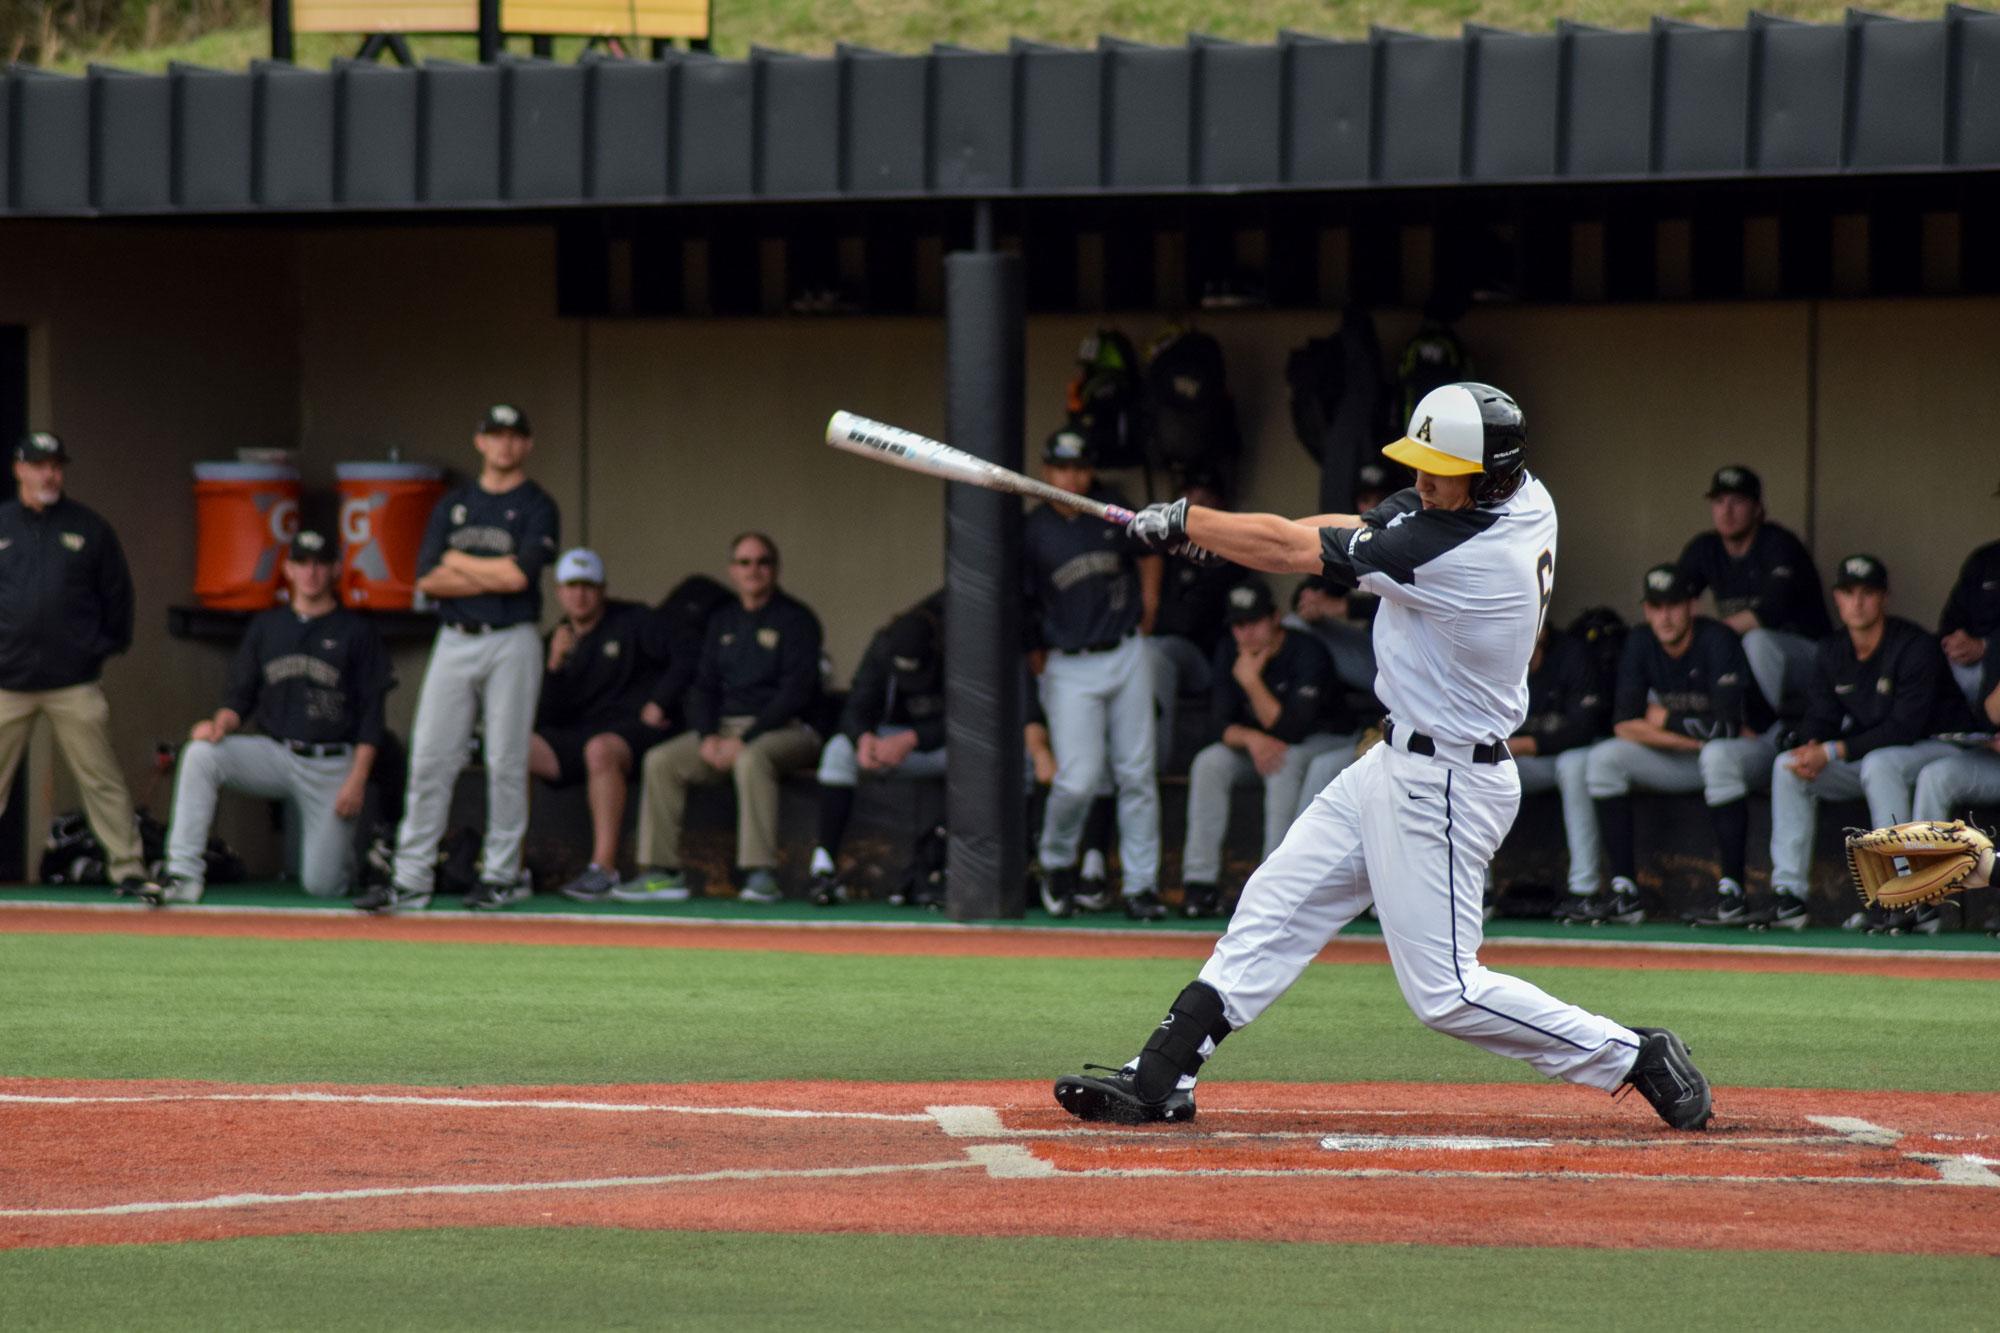 Junior Tyler Stroup swings the bat during the home game against Wake Forest. The Mountaineers lost to Wake Forest with the final score being 4-5.